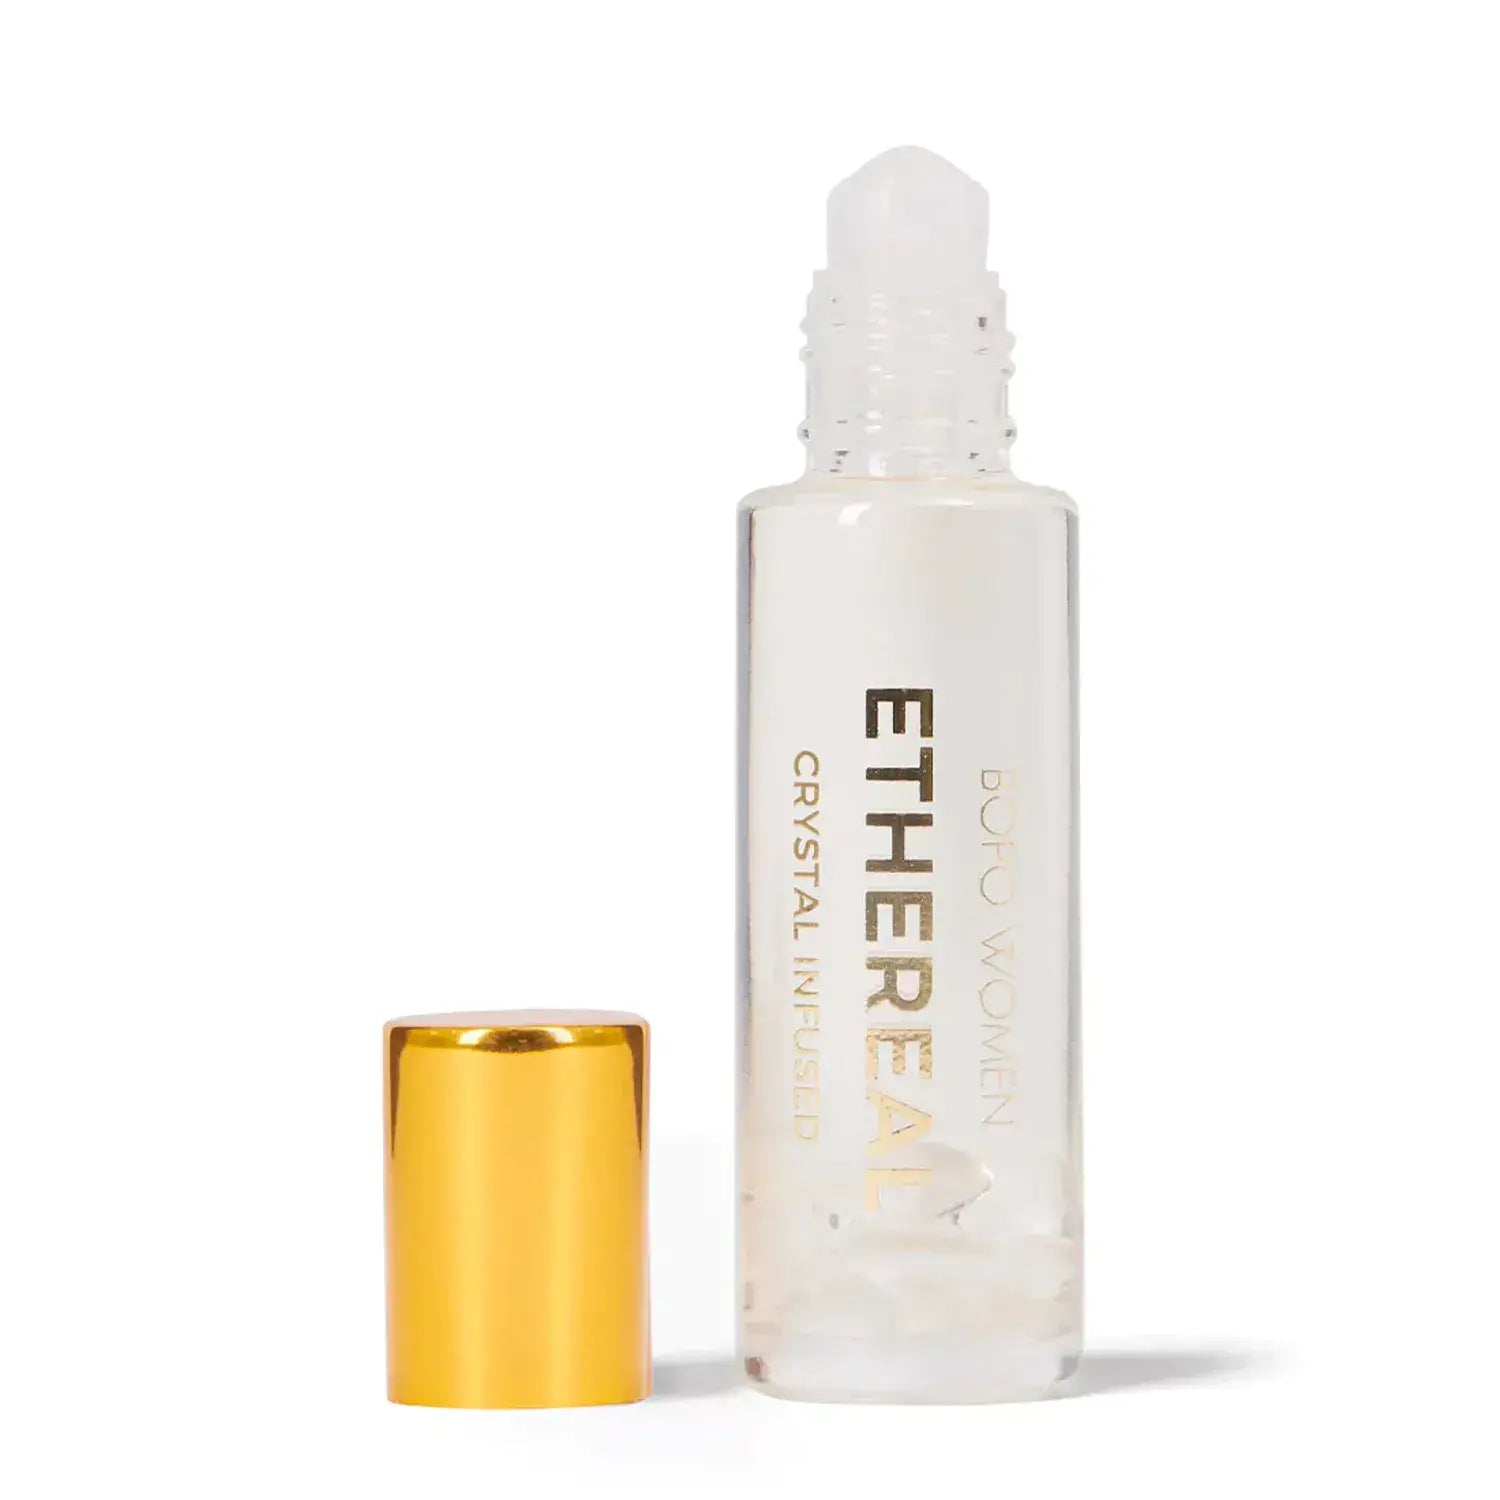 Ethereal Clear Quartz Crystal Infused Perfume Roller by Bopo Women (15ml)